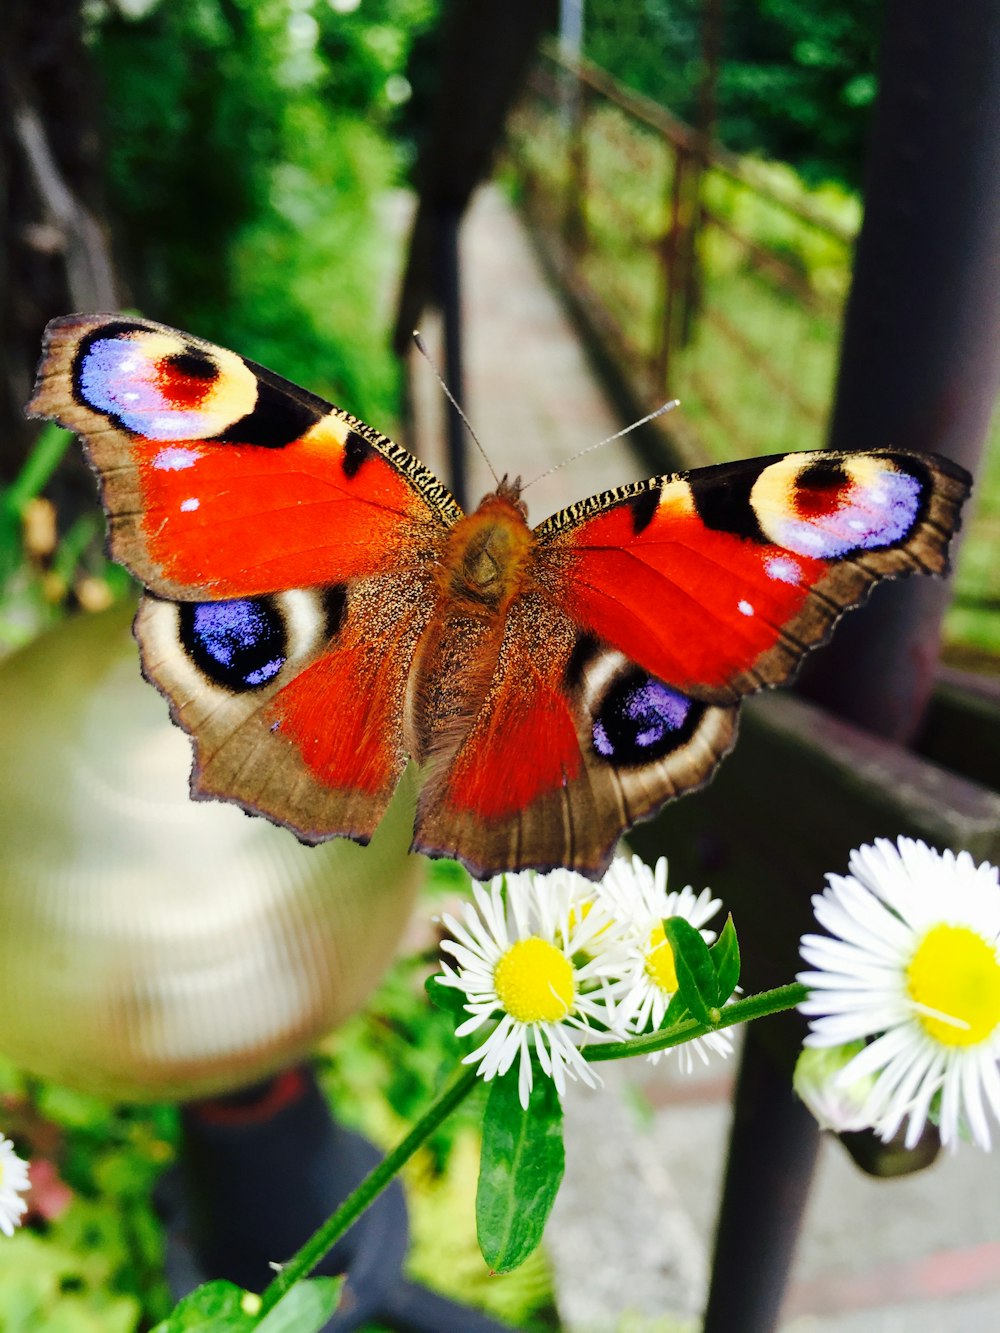 peacock butterfly perched on white flower in close up photography during daytime